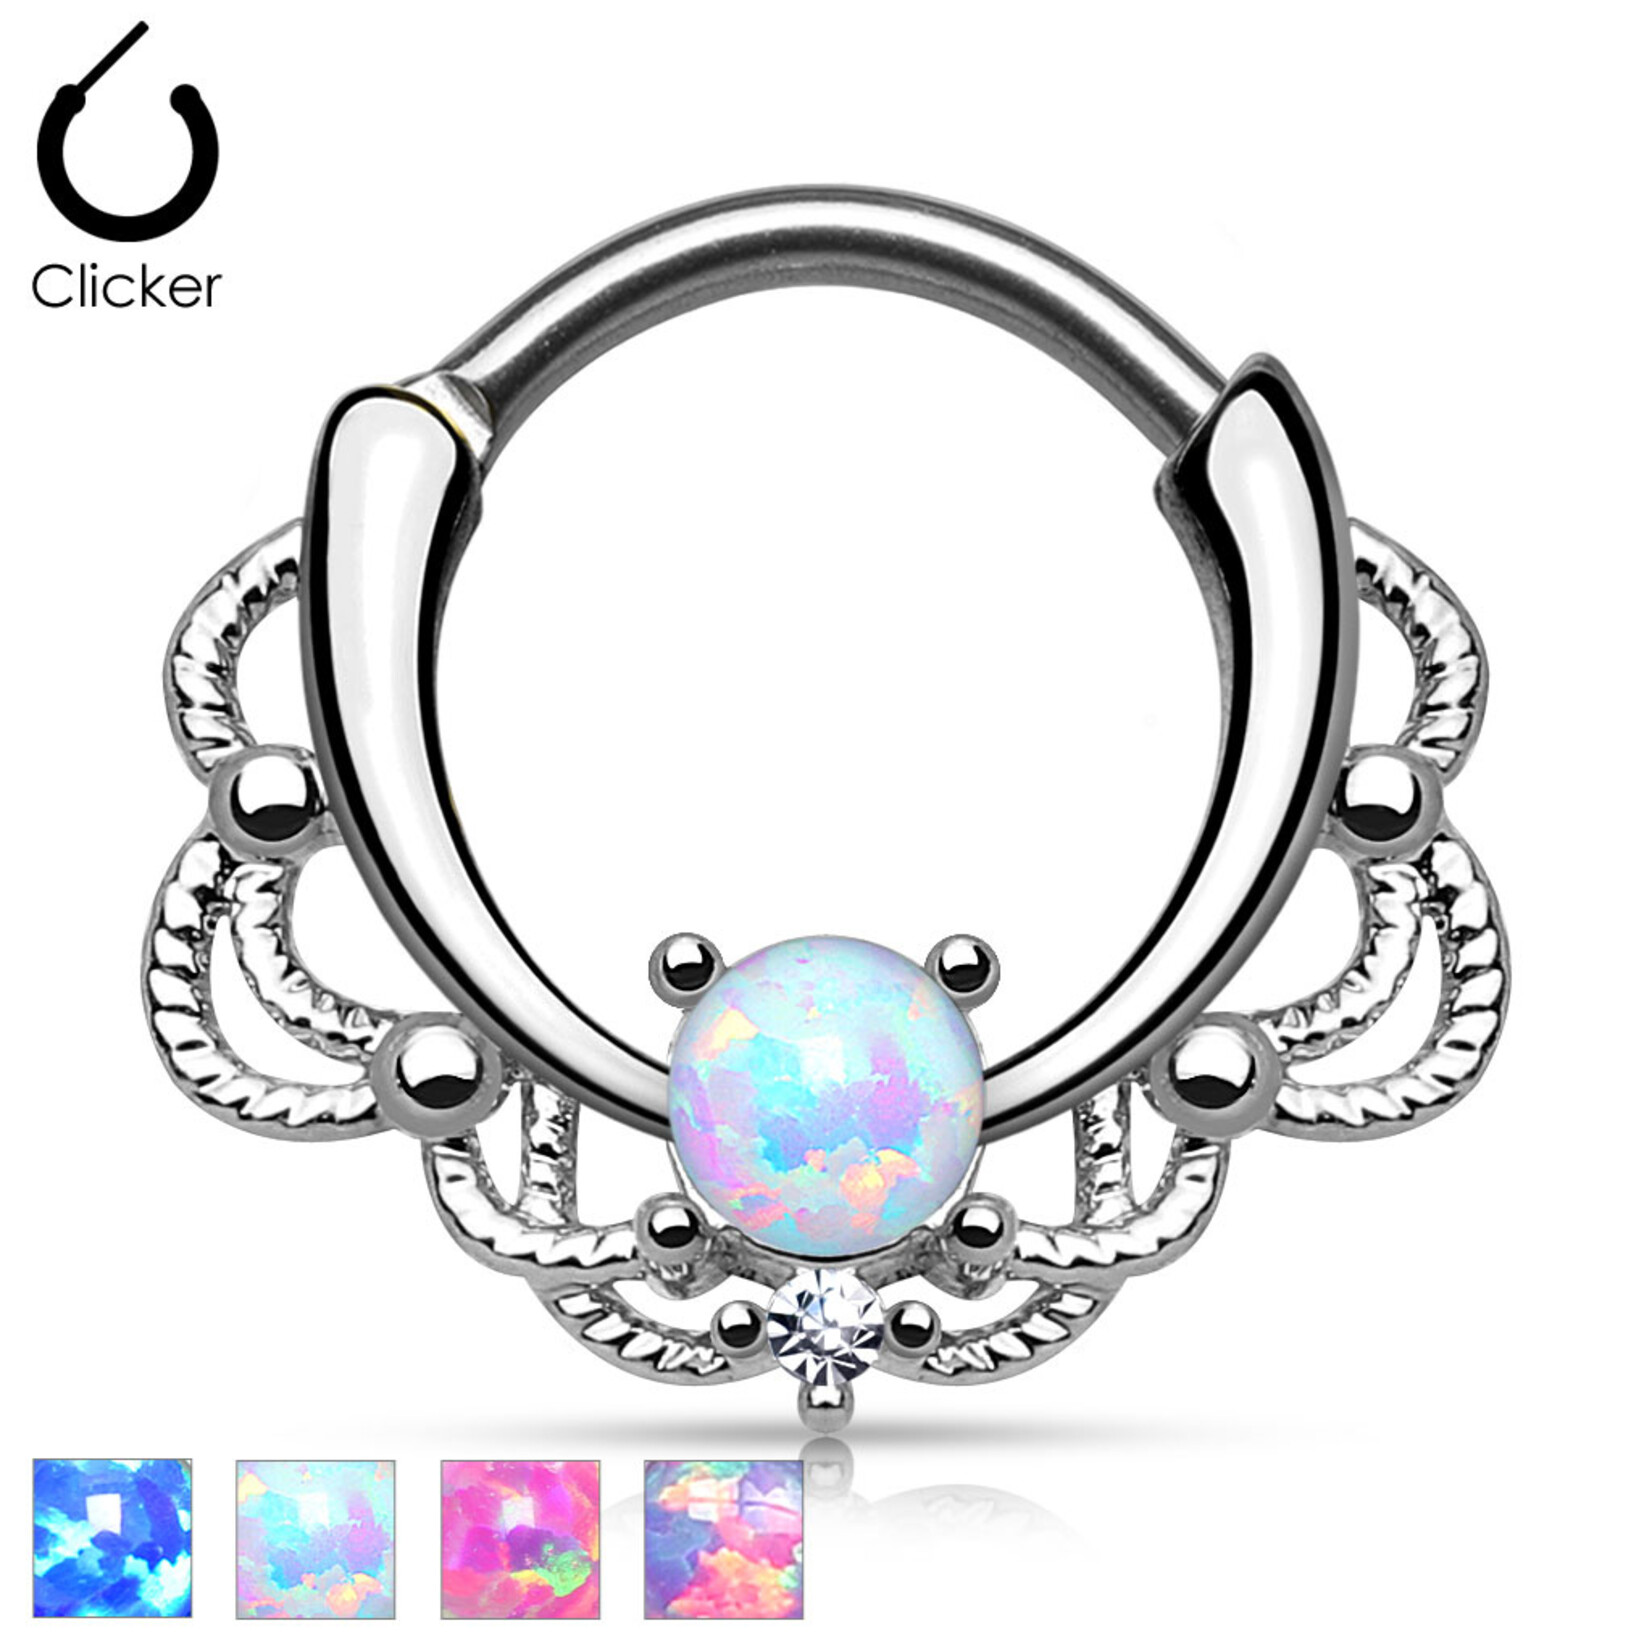 Hollywood Body Jewelry Lacey Opal Clicker